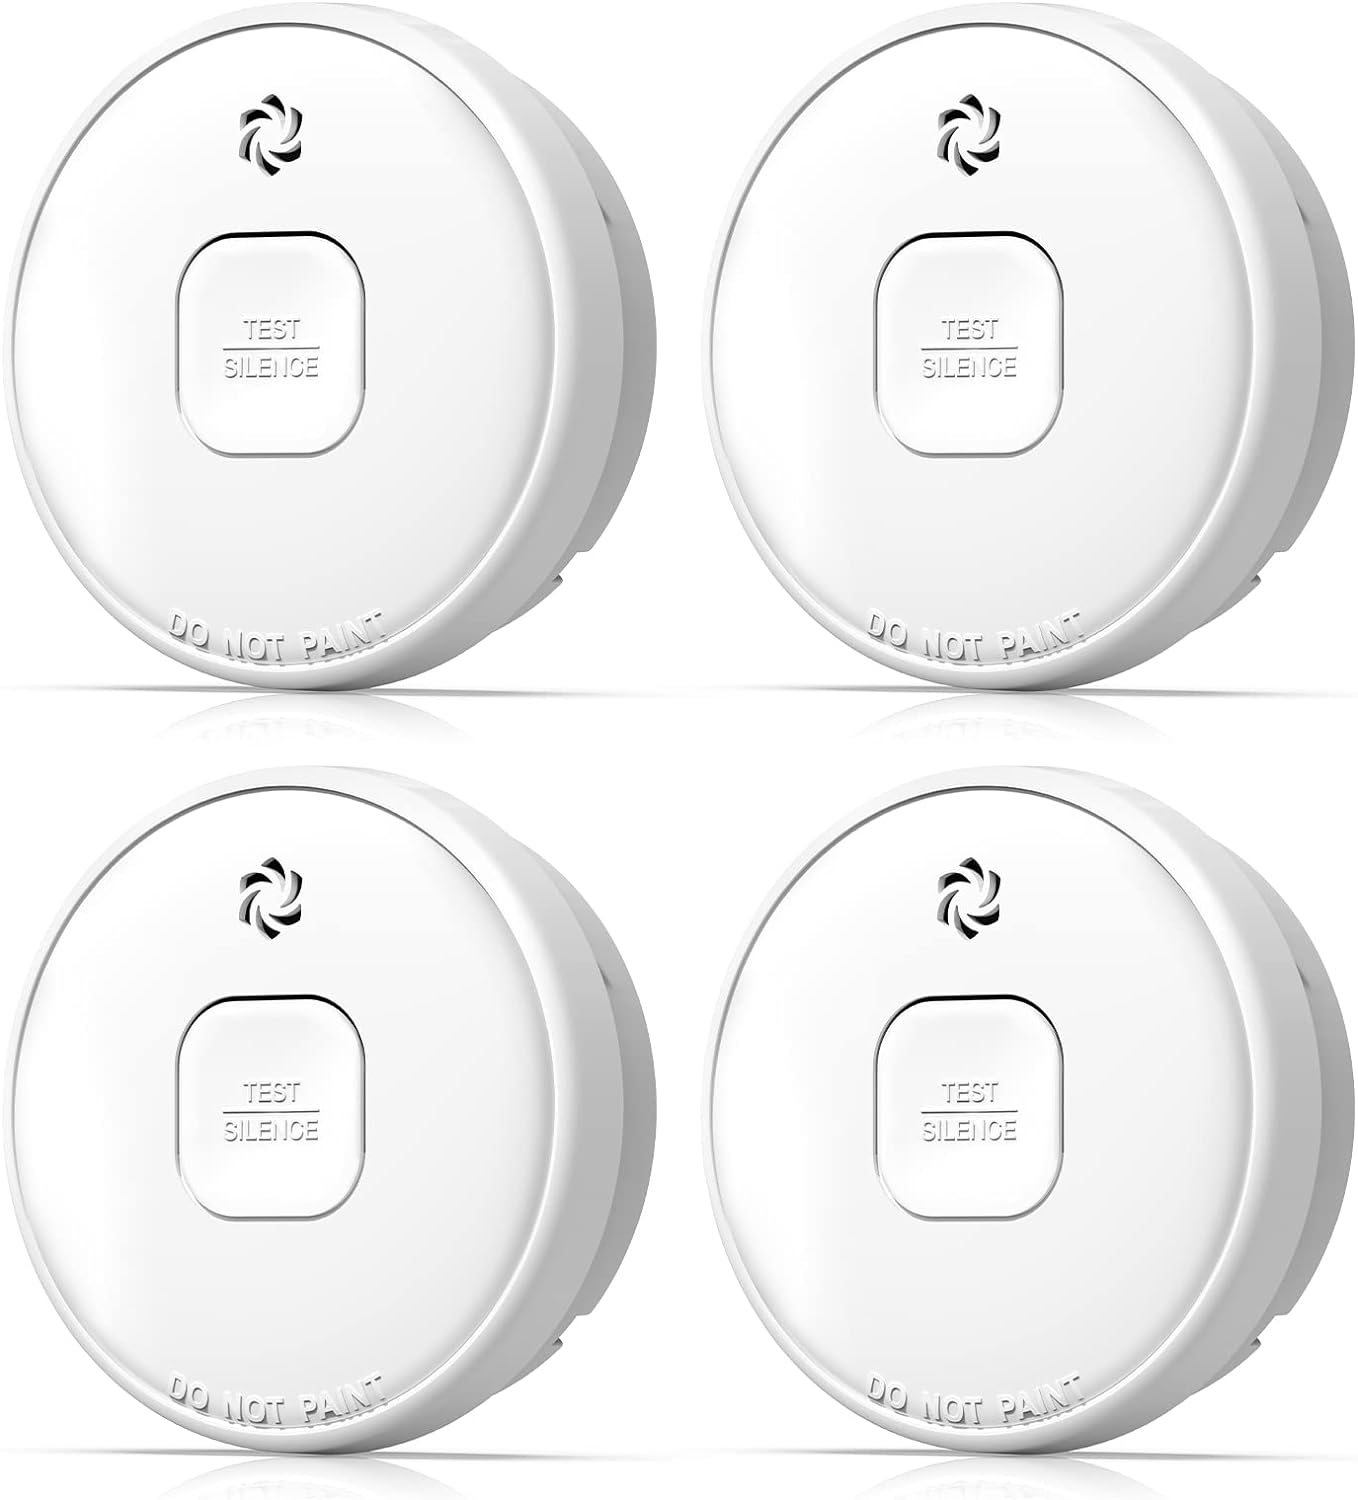 SITERWELL ELECTRONICS CO.,LIMI Putogesafe Smoke Detector, 10-Year Smoke Alarm with Photoelectric Sensor and Built-in 3V Lithum Battery, Fire Alarm with Test B